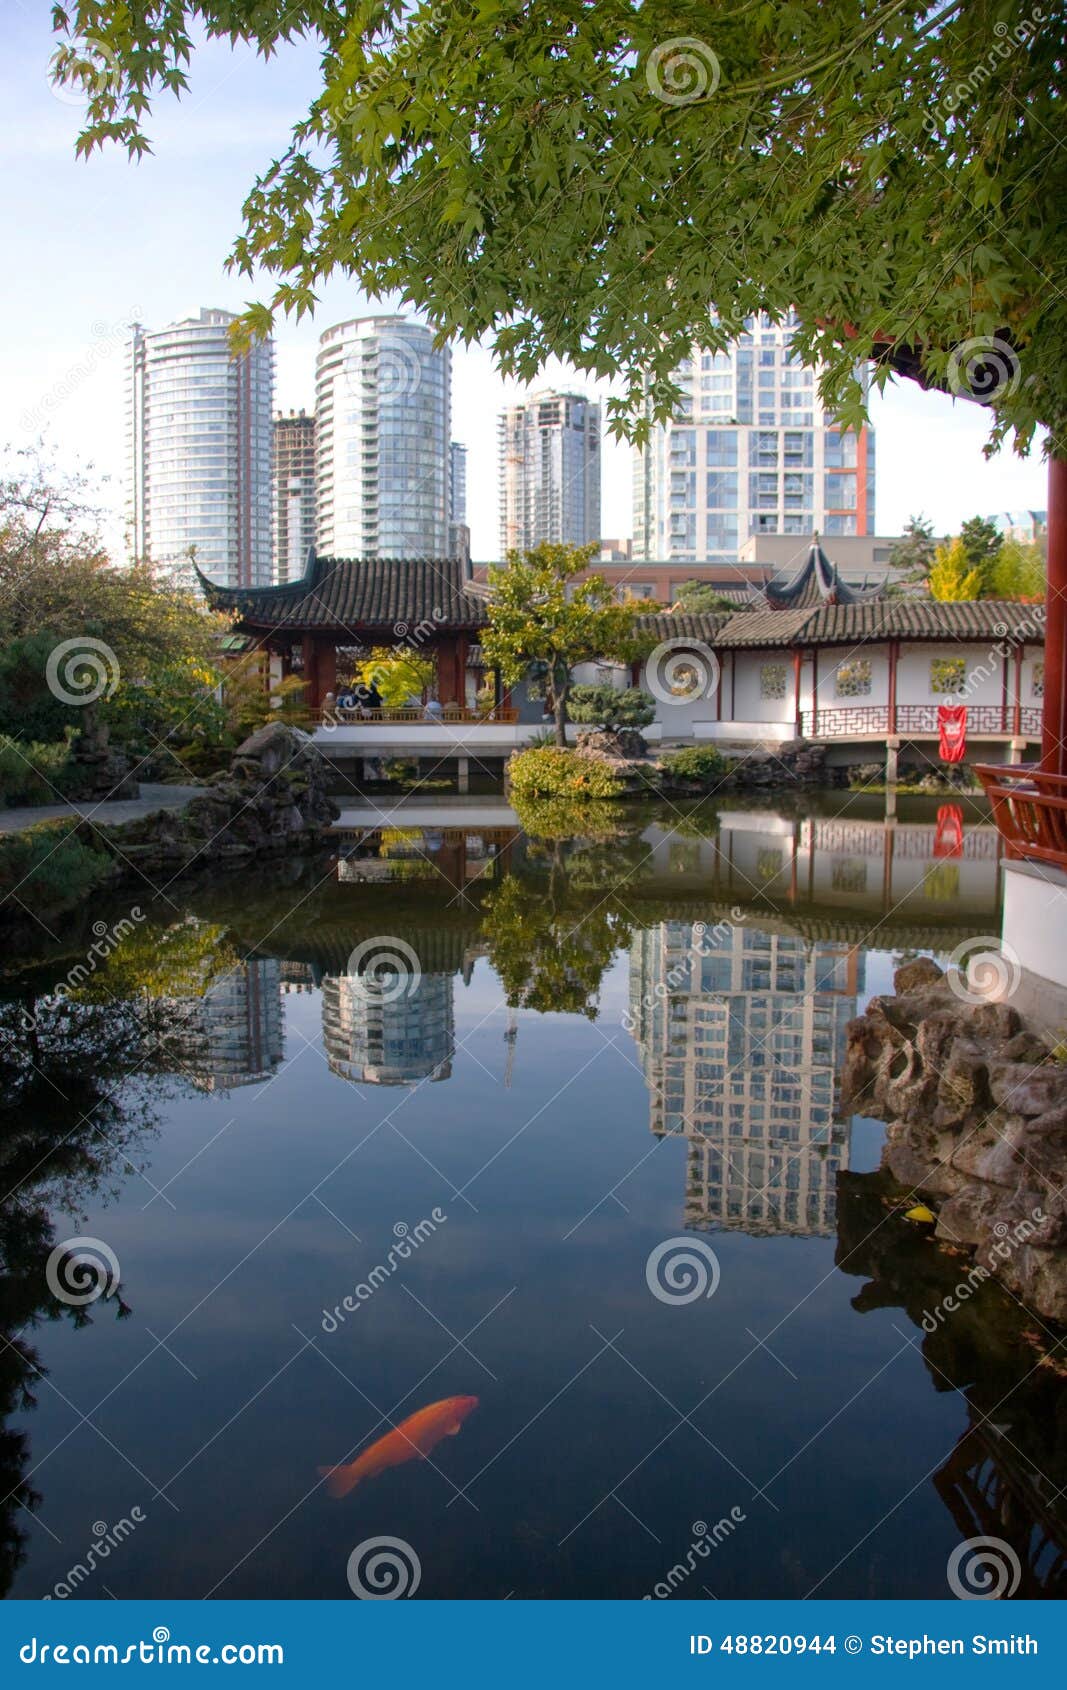 traditional chinese pond while modern highrises behind, vancouver, bc